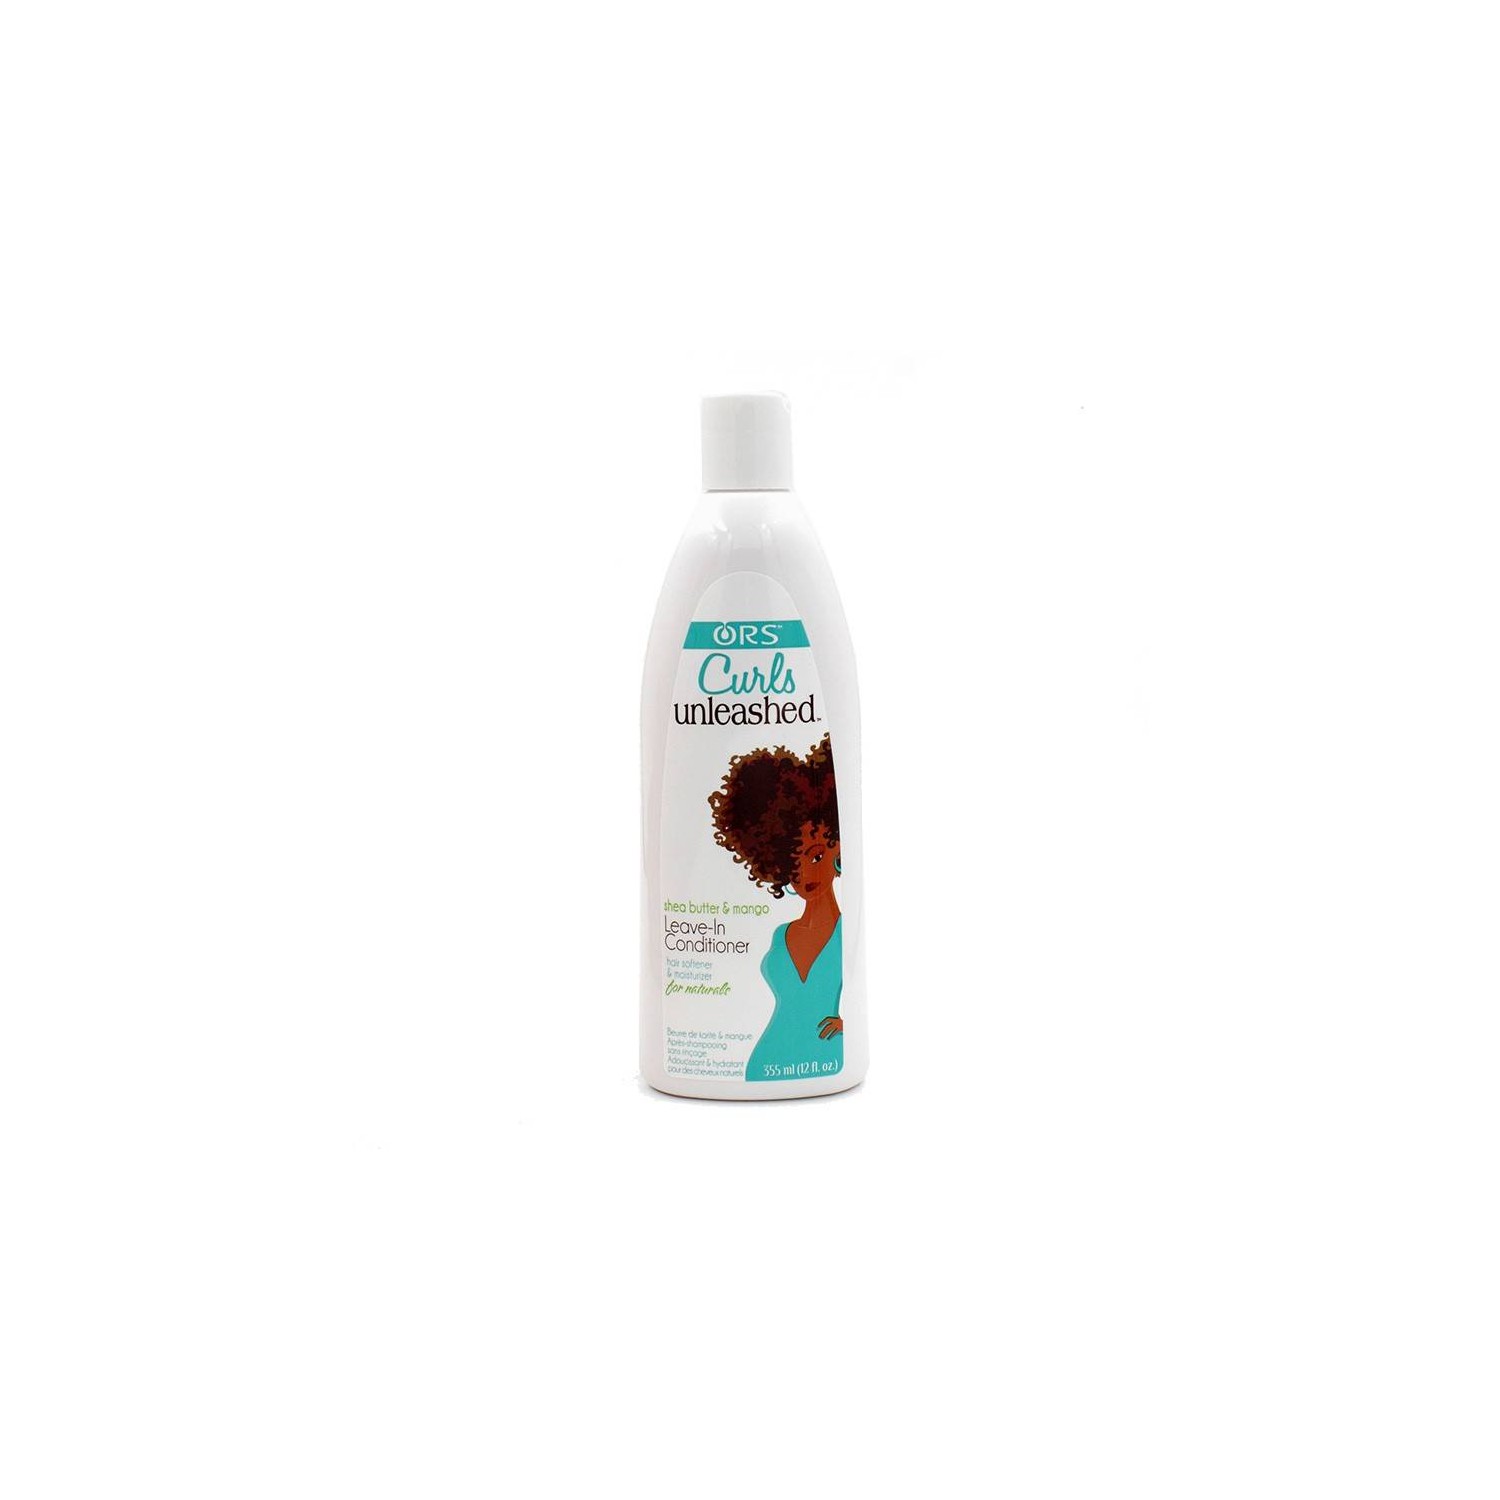 Ors Curls Unleashed Leave In Conditioning 355 ml